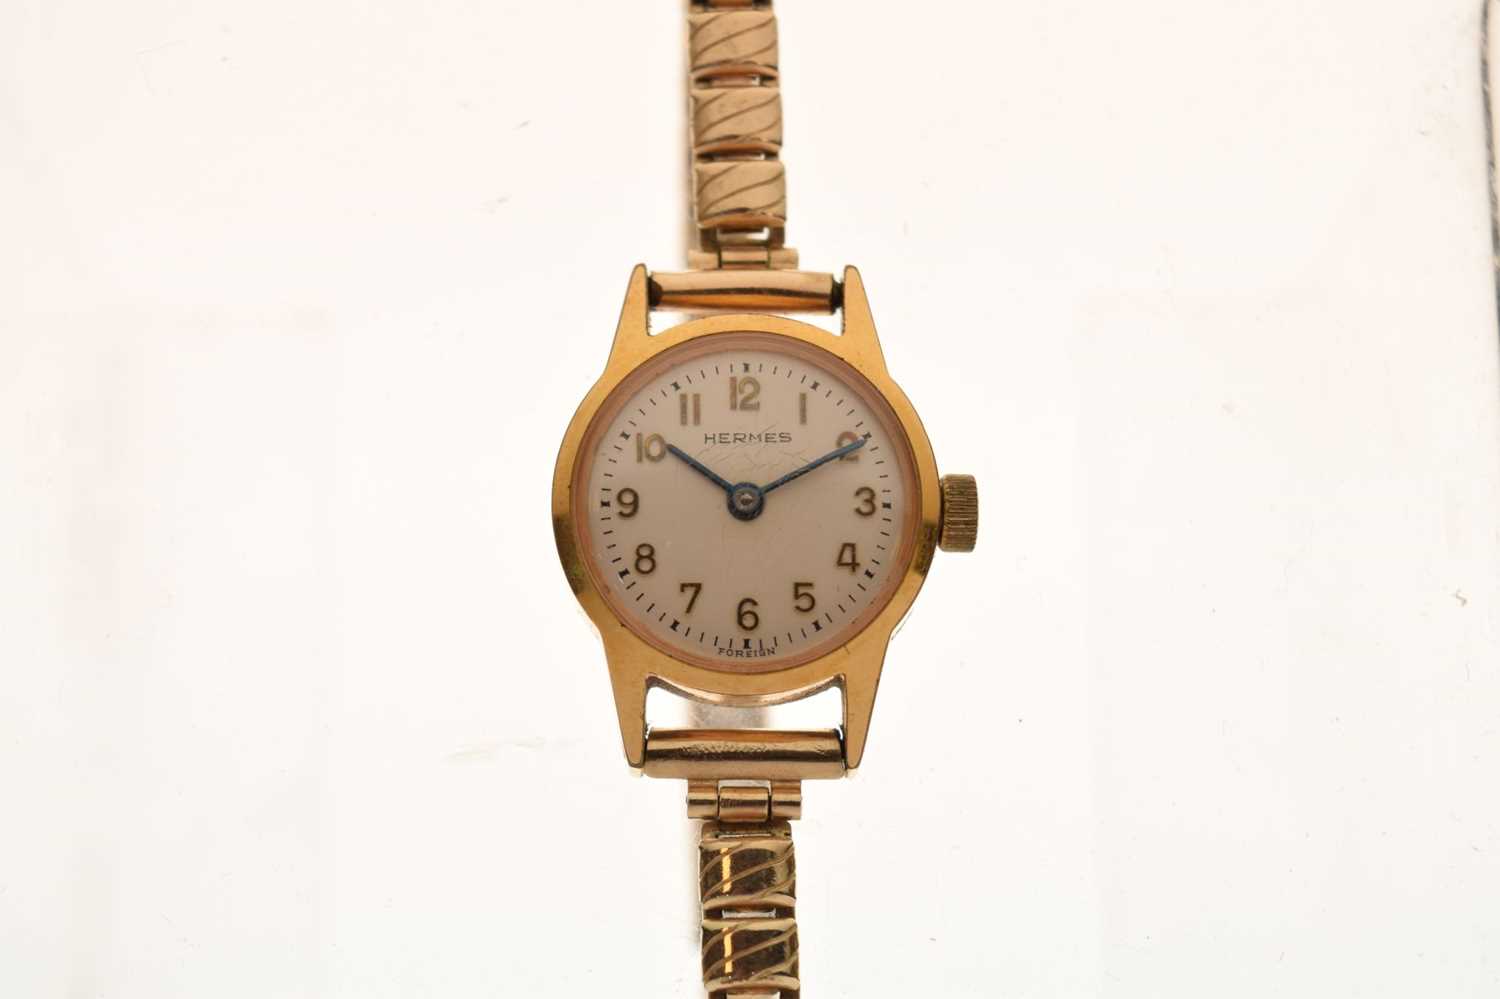 Hermes - Lady's gold plated cocktail watch - Image 2 of 7